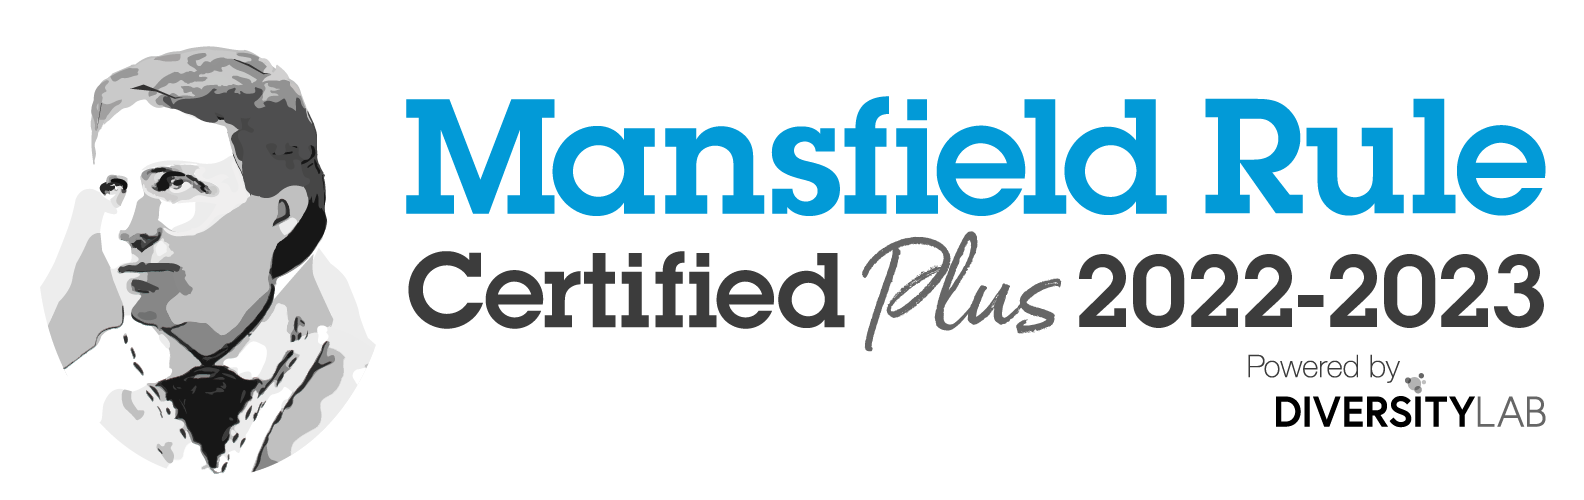 Dykema Achieves Mansfield 6.0 Certification Plus Classification